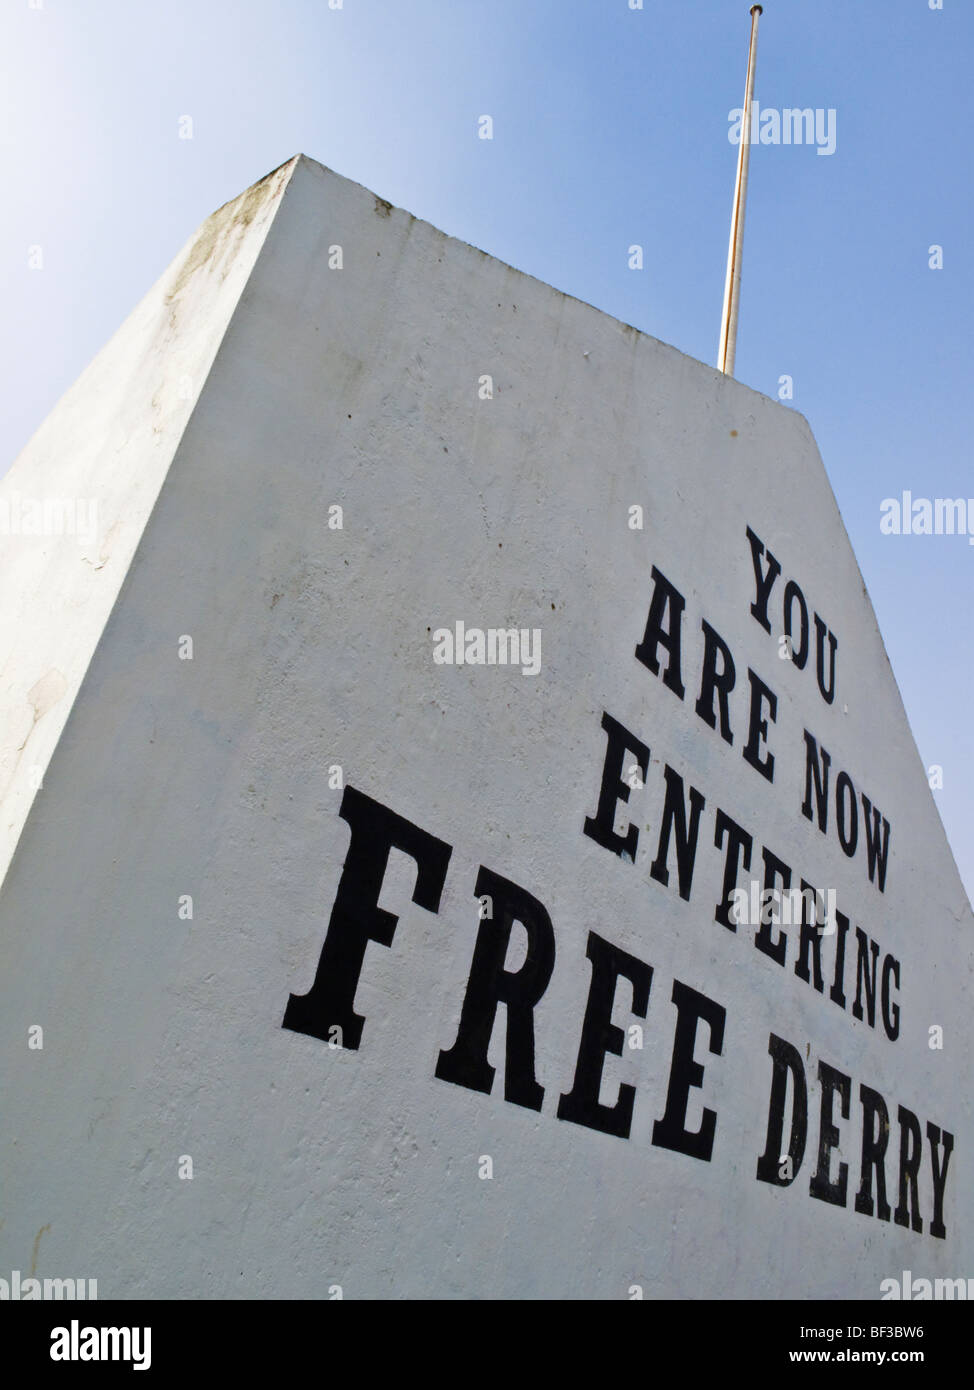 'You are now entering Free Derry', a slogan painted on the 'Free Derry Wall' near the Bogside area of Derry, Northern Ireland Stock Photo